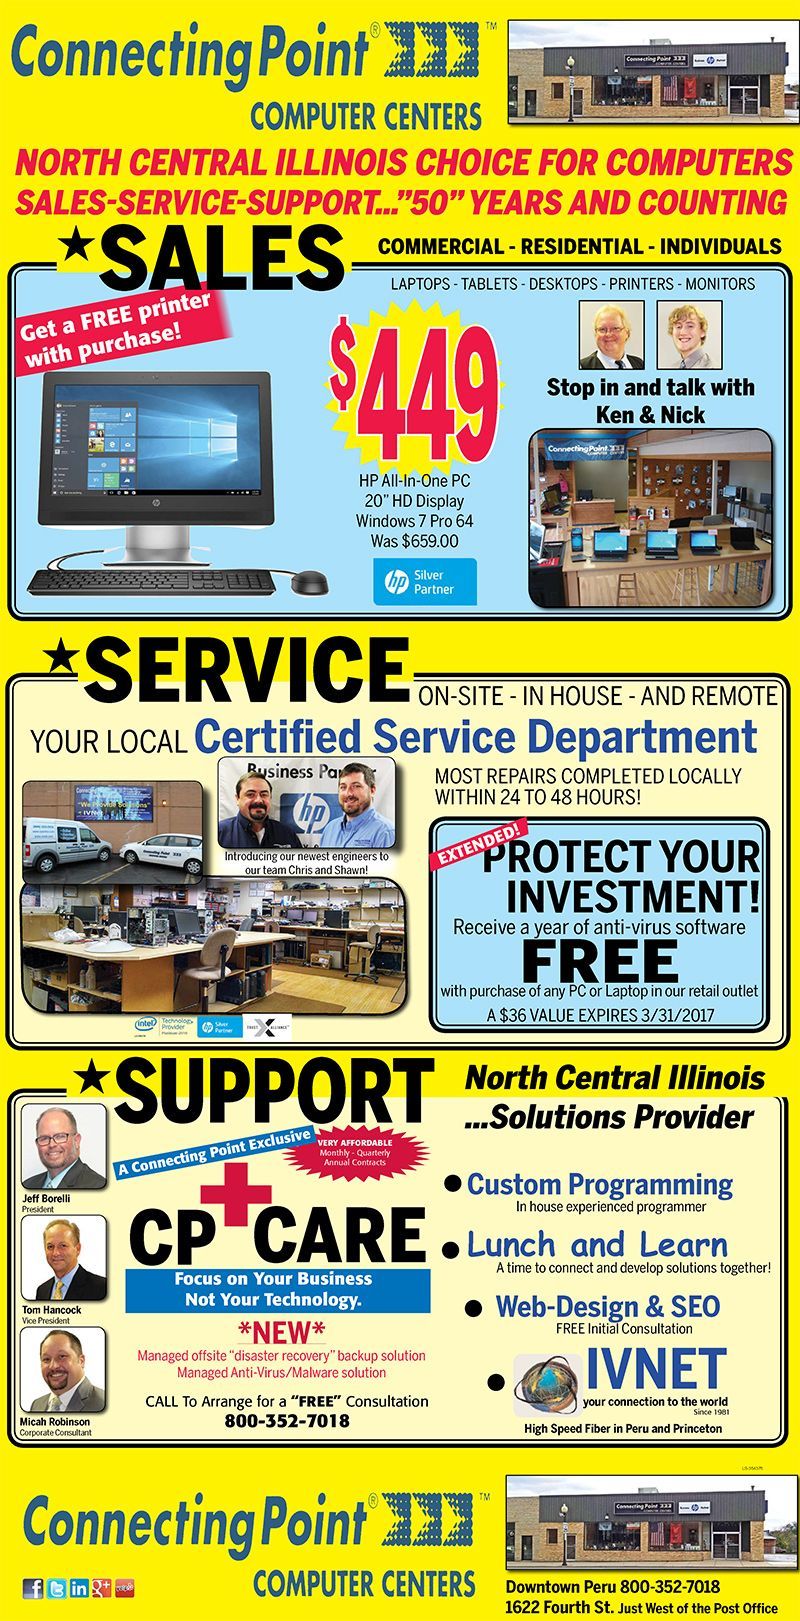 Local computer sales, service and support 2-23-17